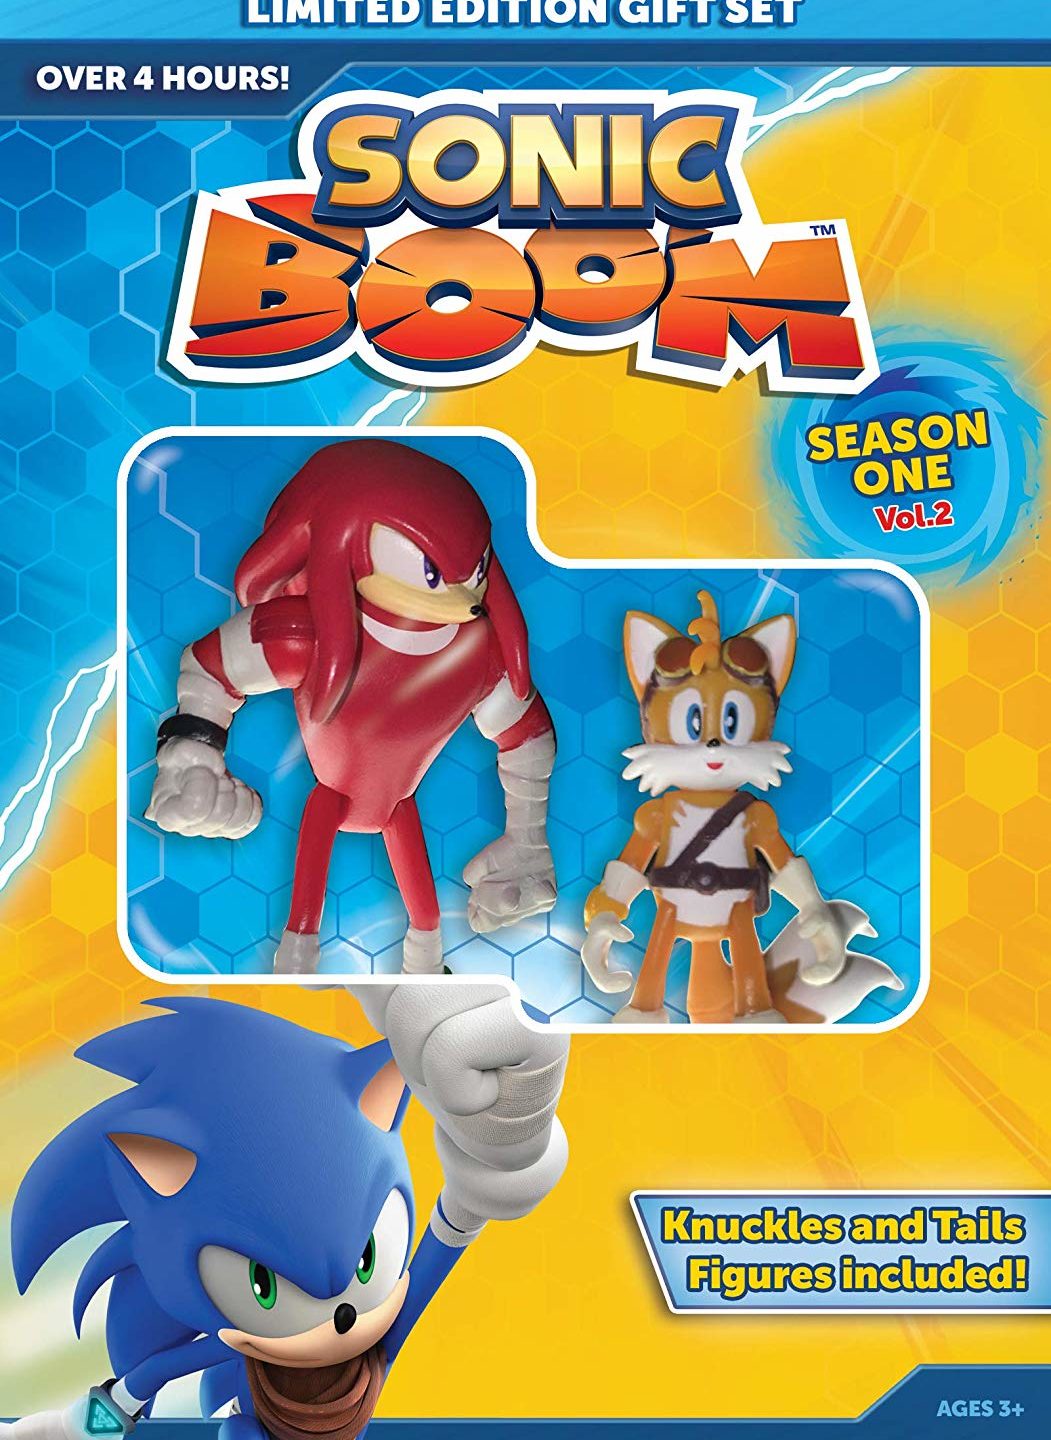 Sonic Boom Season 1, Volume 2 * Nearly Five Hours of Laugh-Out-Loud, Animated Fun